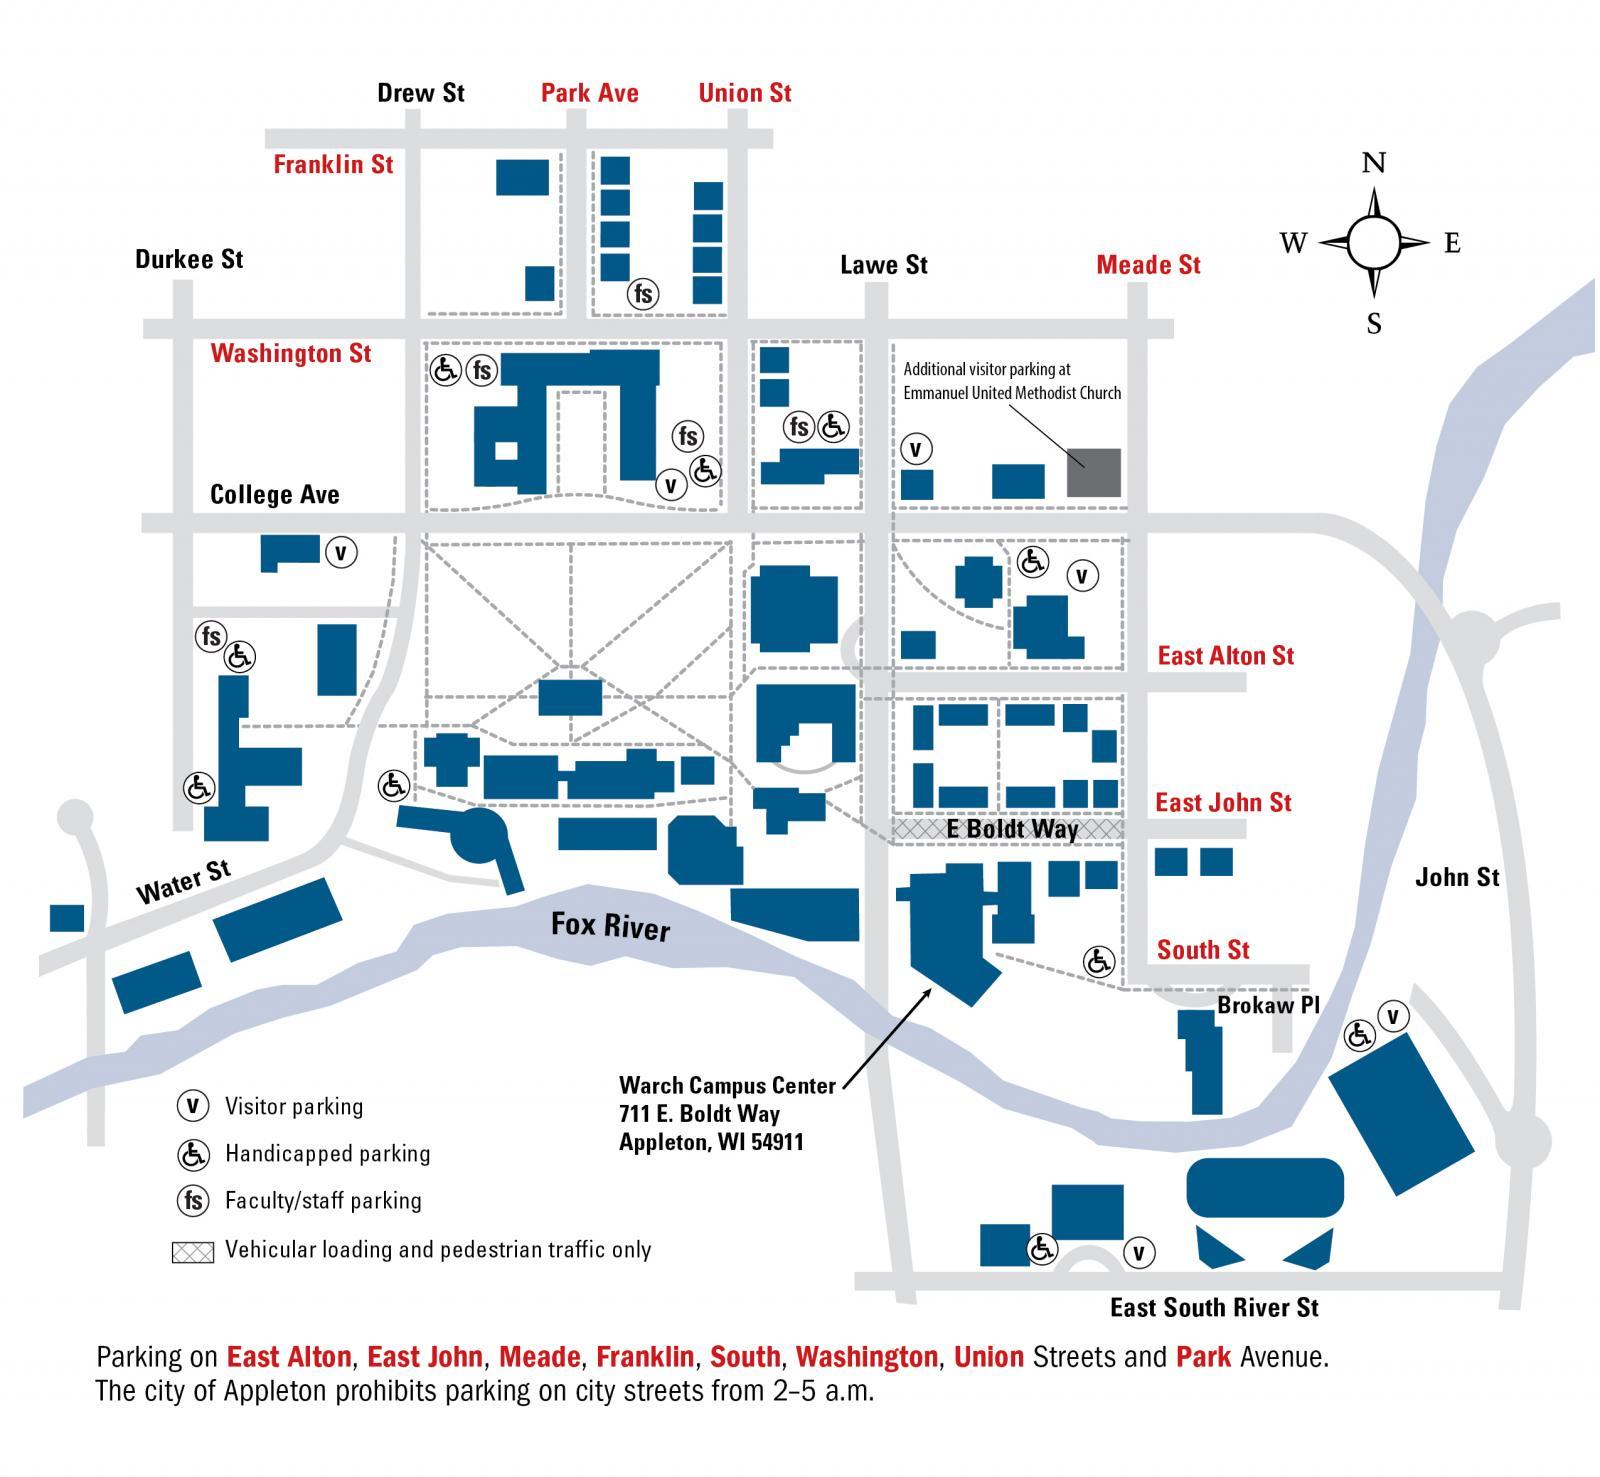 Map of campus parking for special events at Warch Campus Center